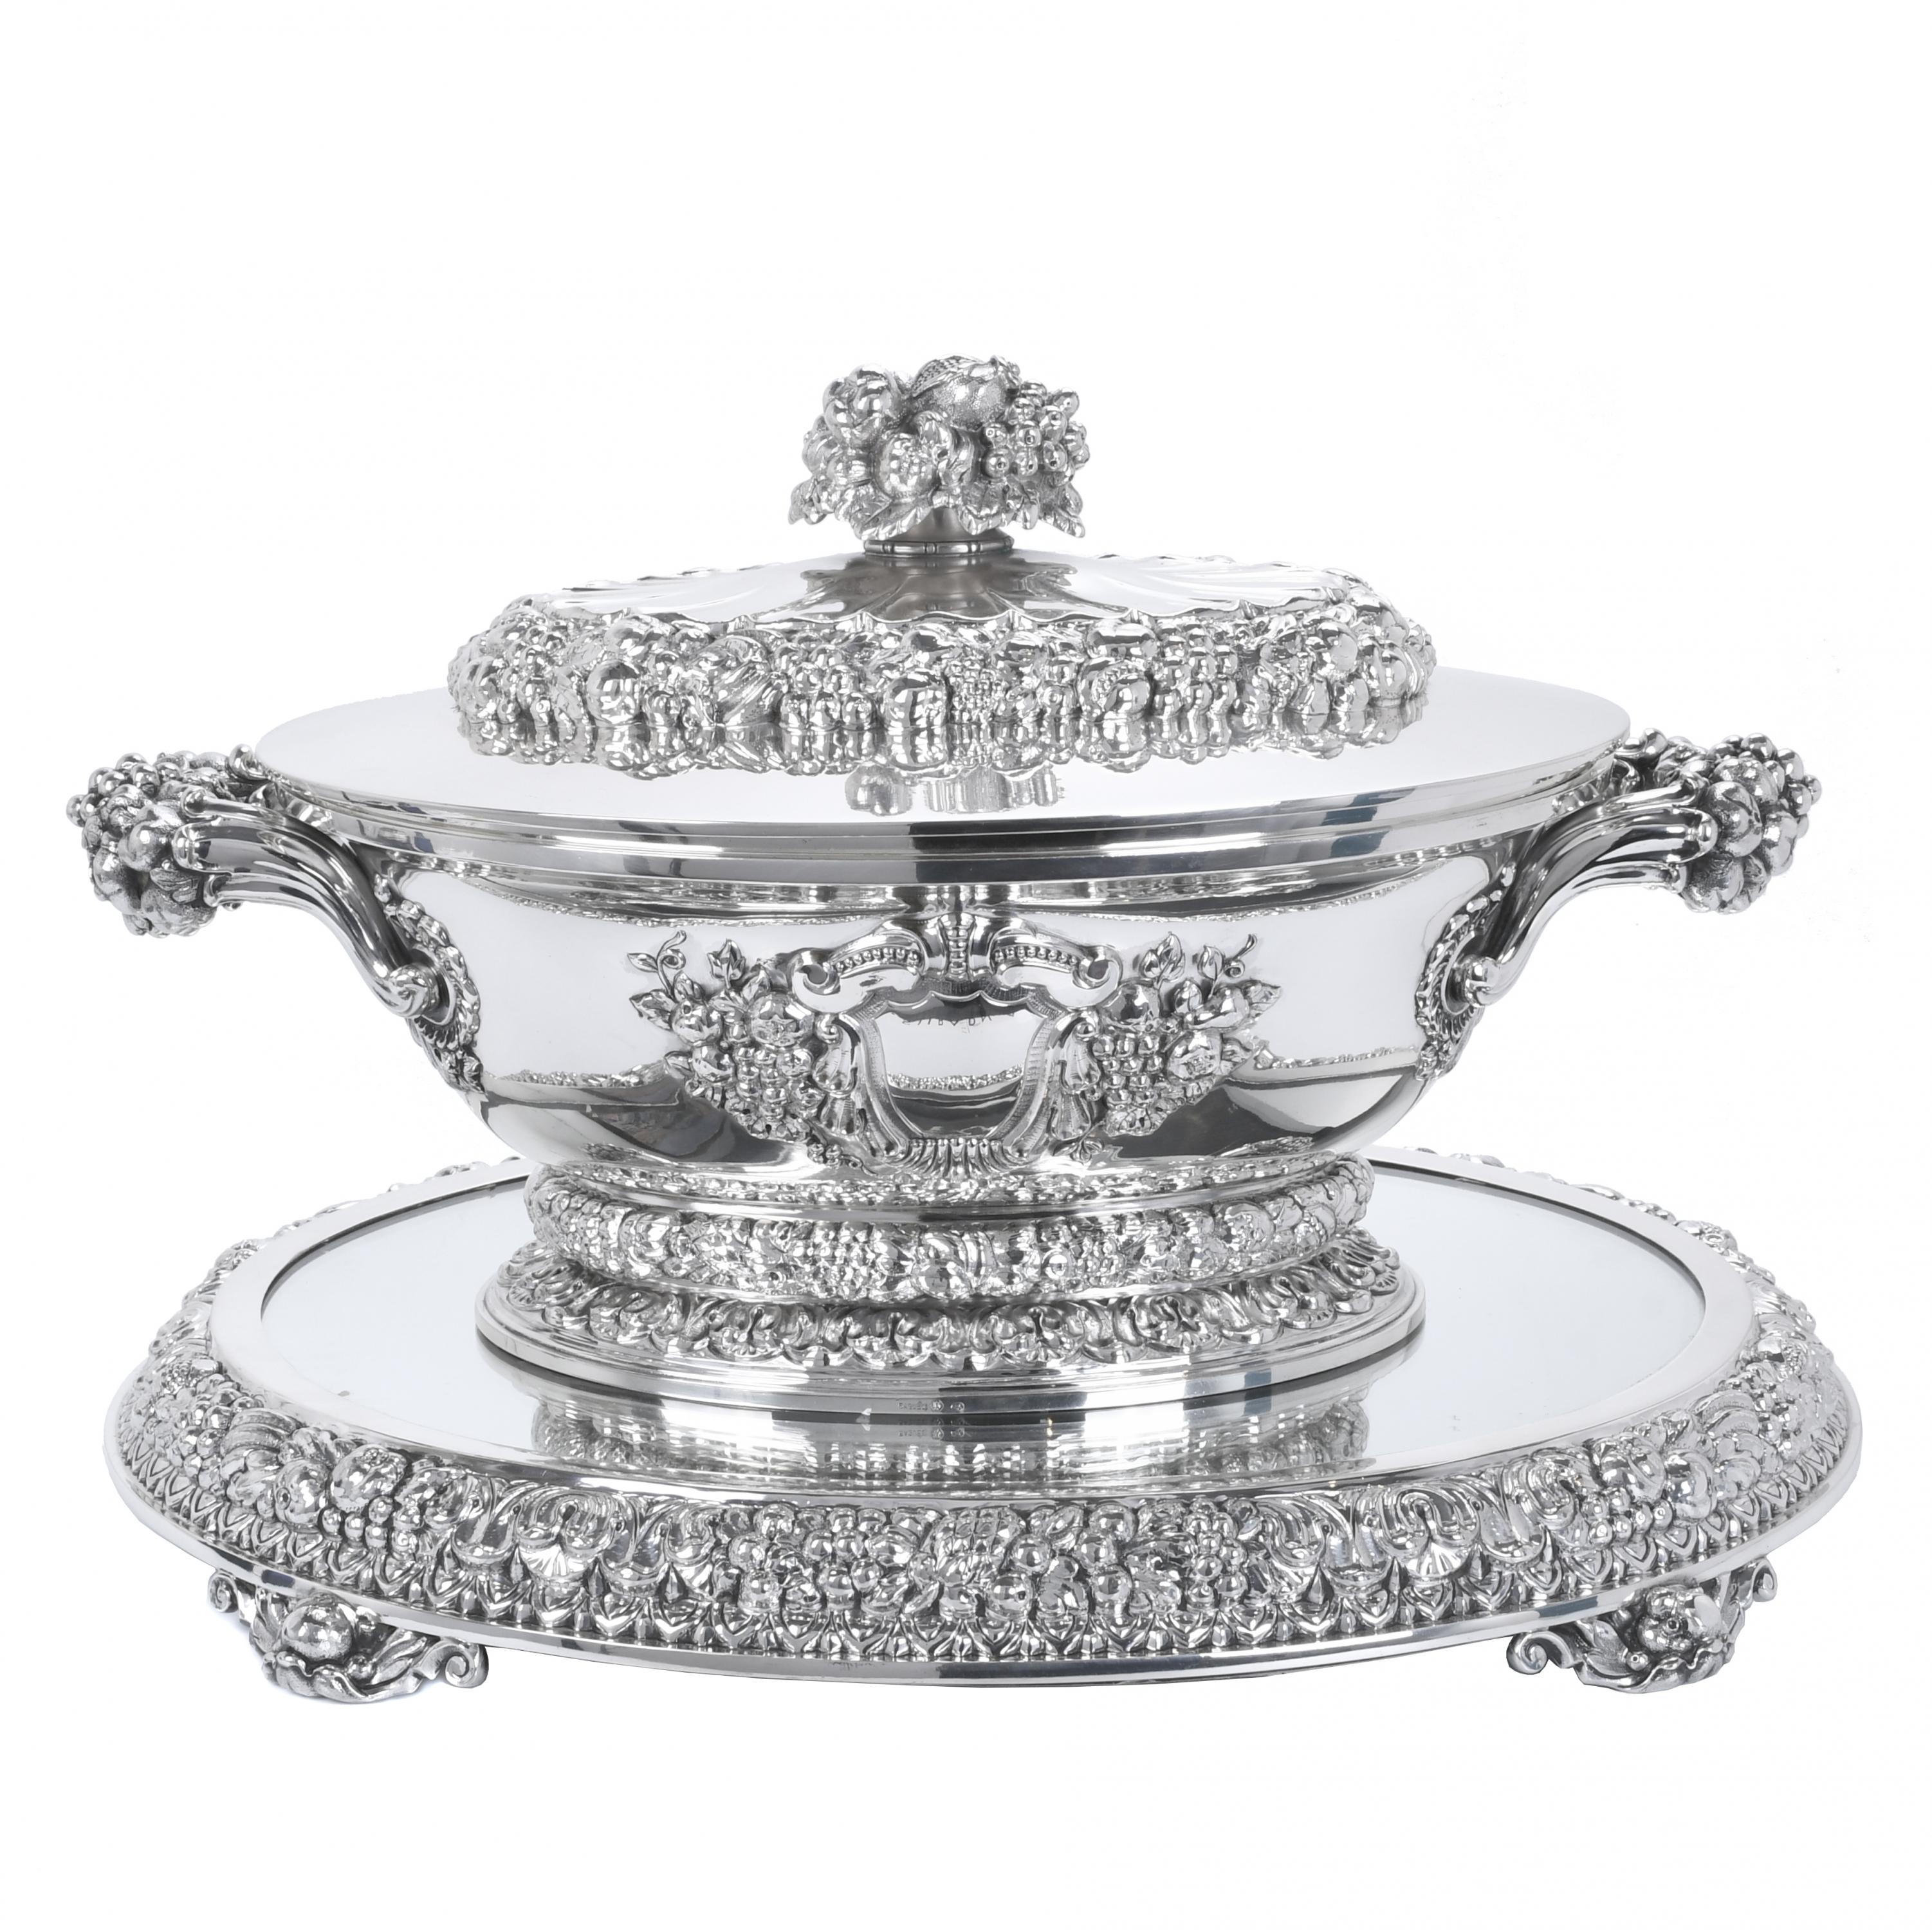 BAGUÉS. LARGE BARCELONA SILVER TUREEN WITH "SURTOUT", MID 2